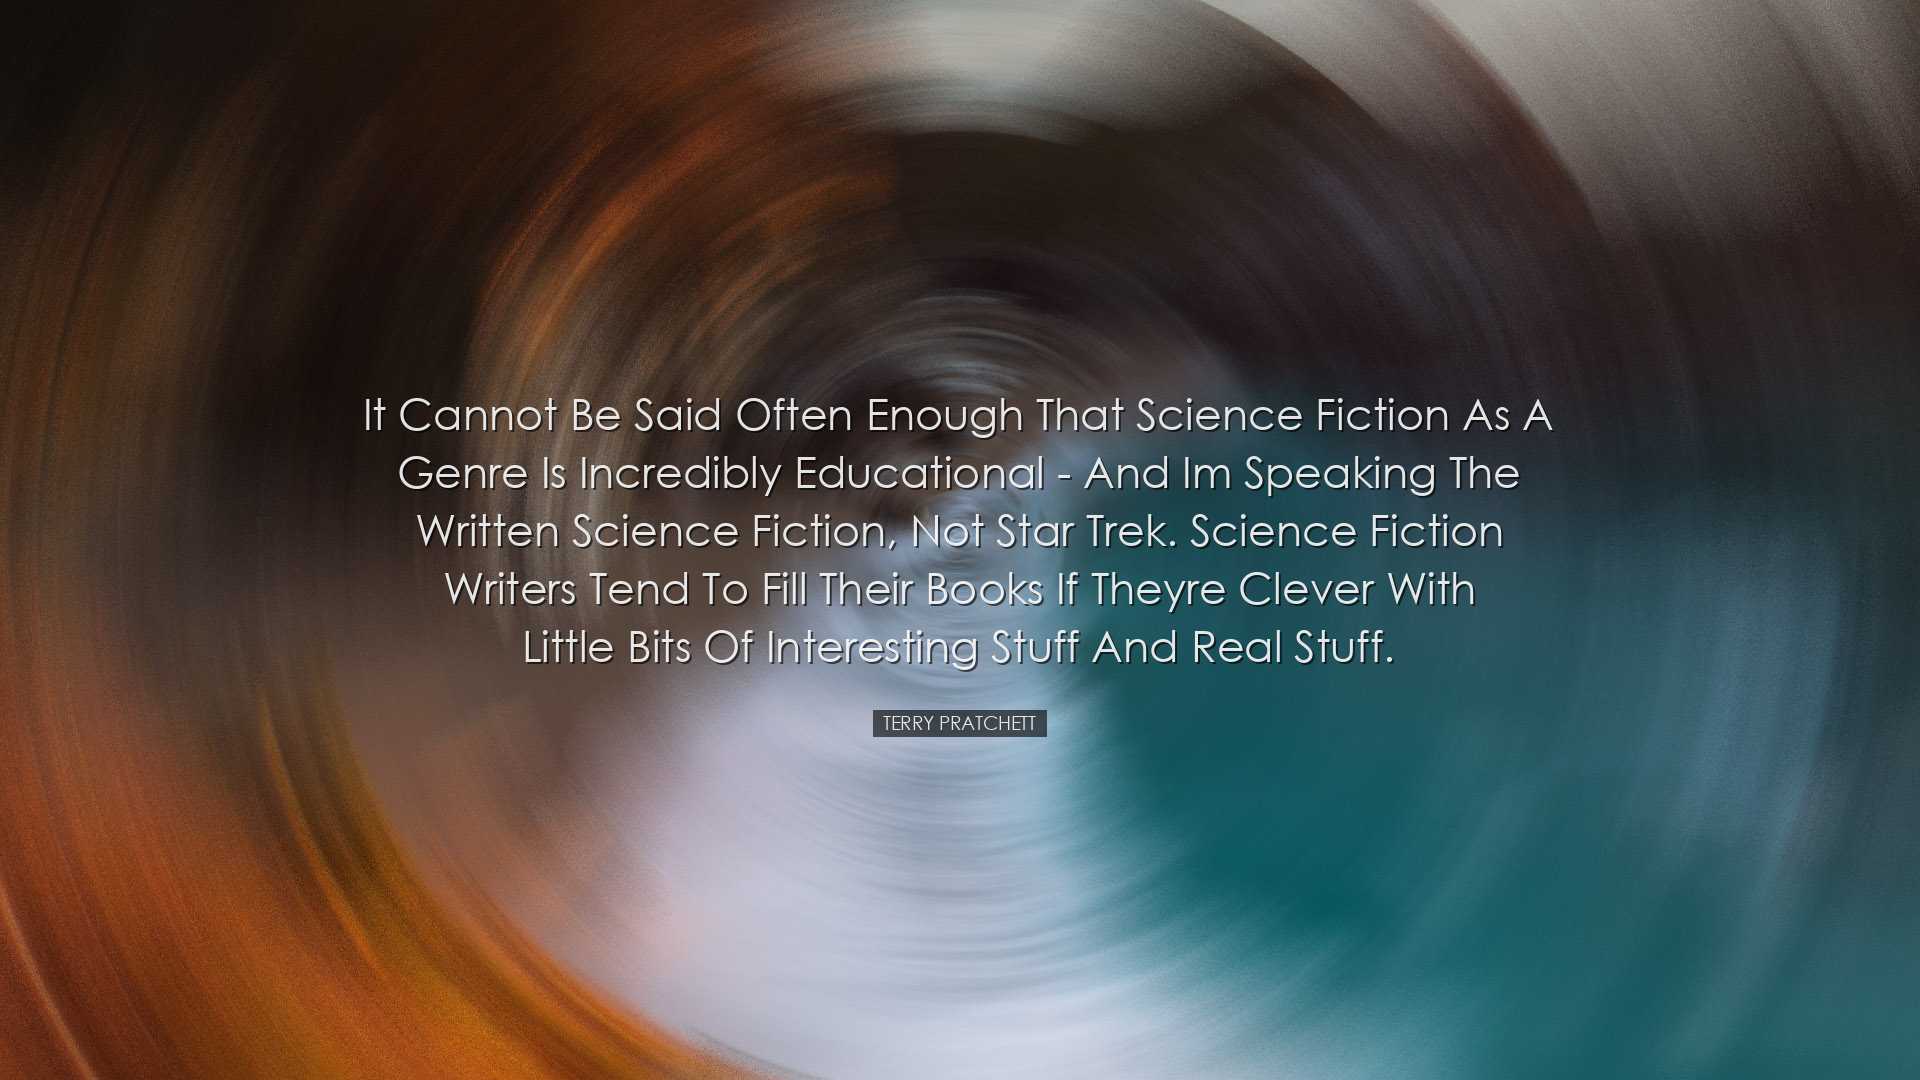 It cannot be said often enough that science fiction as a genre is